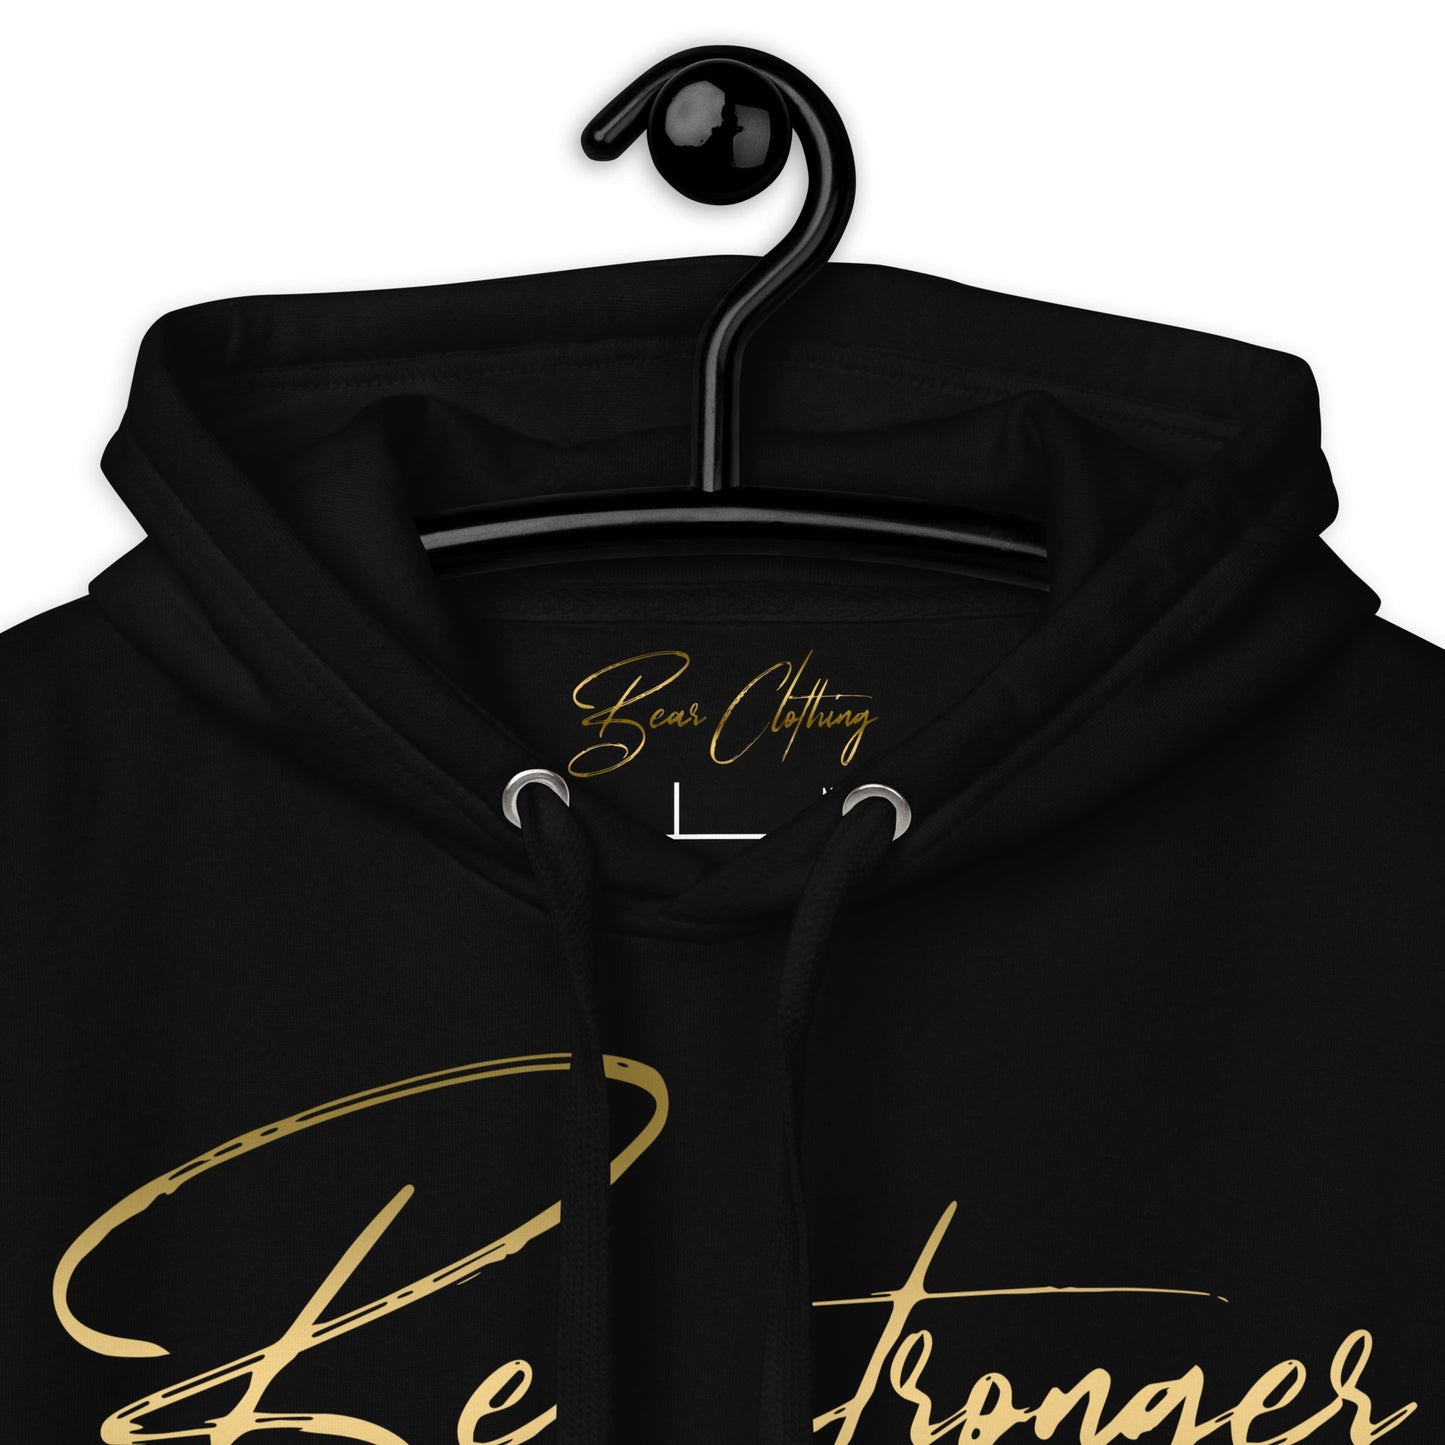 Fall Gold Print Stronger Than Your Excuses Unisex Hoodie